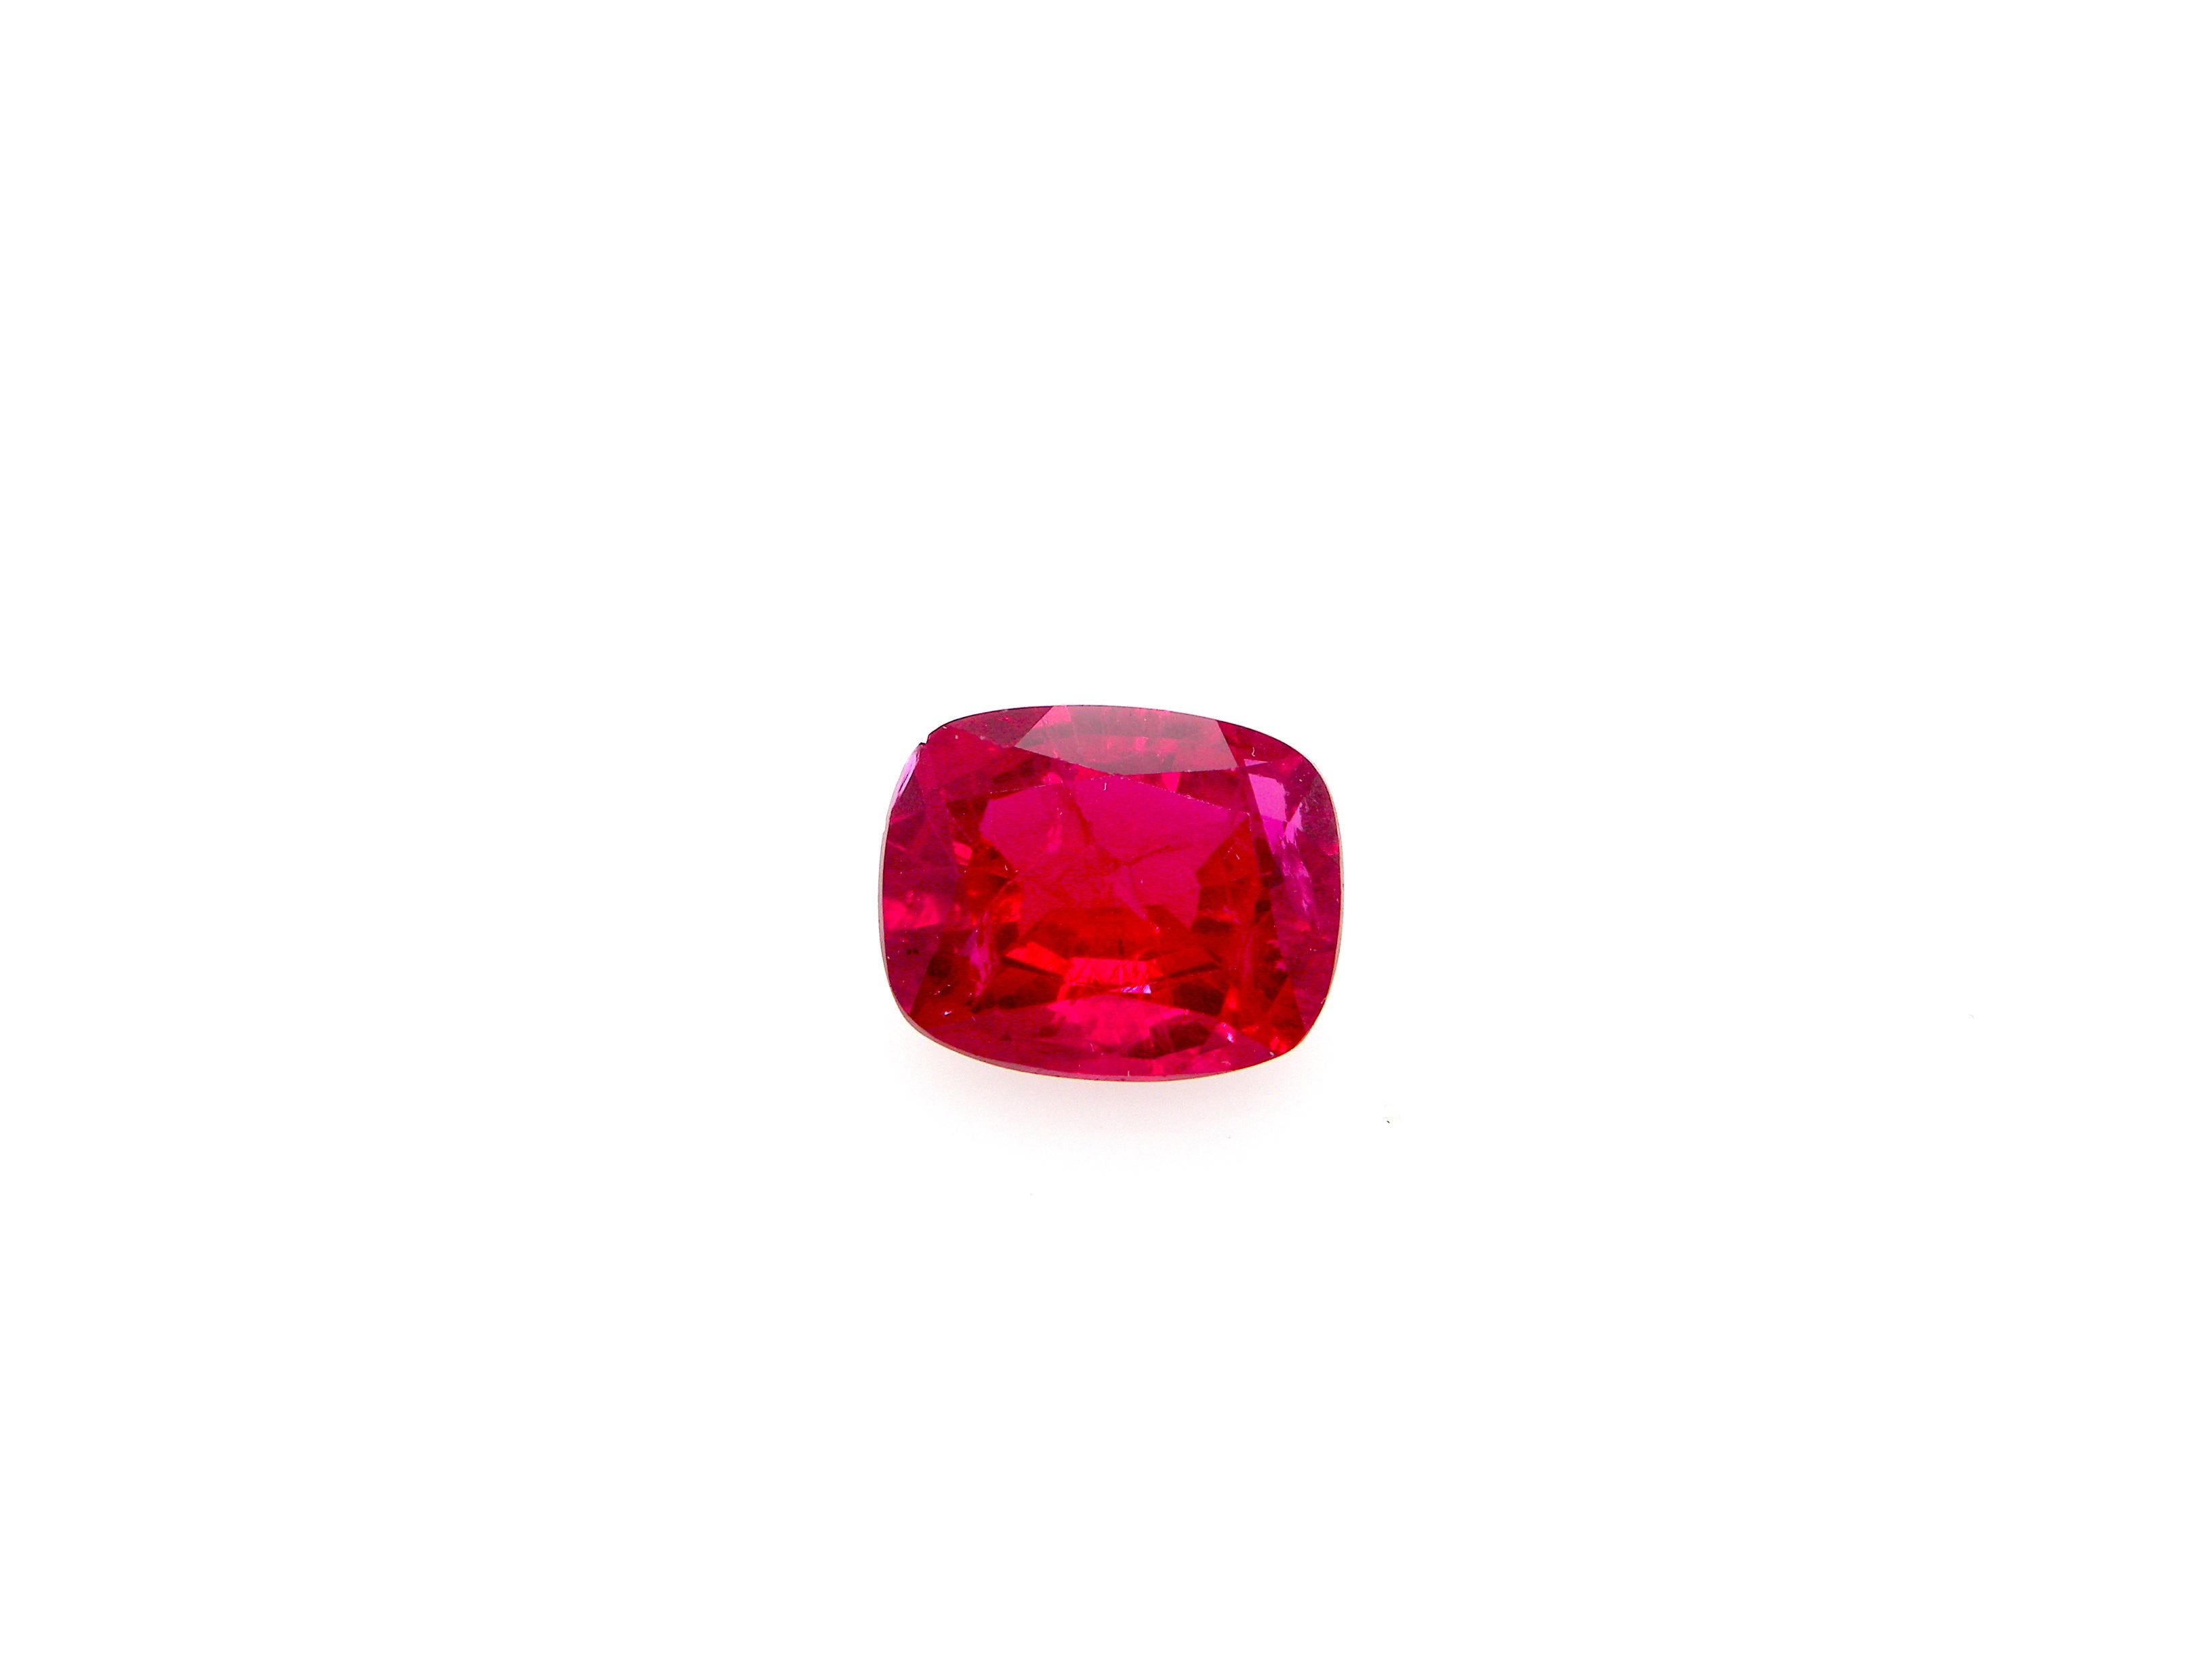 5.6 Carat Cushion-Cut Vivid Red Natural Tourmaline:

A gorgeous gemstone, it is a 5.6 carat cushion-cut vivid red natural tourmaline. Hailing from the magnificent mines of Tanzania, the tourmaline  possesses a vivid red colour, with incredible